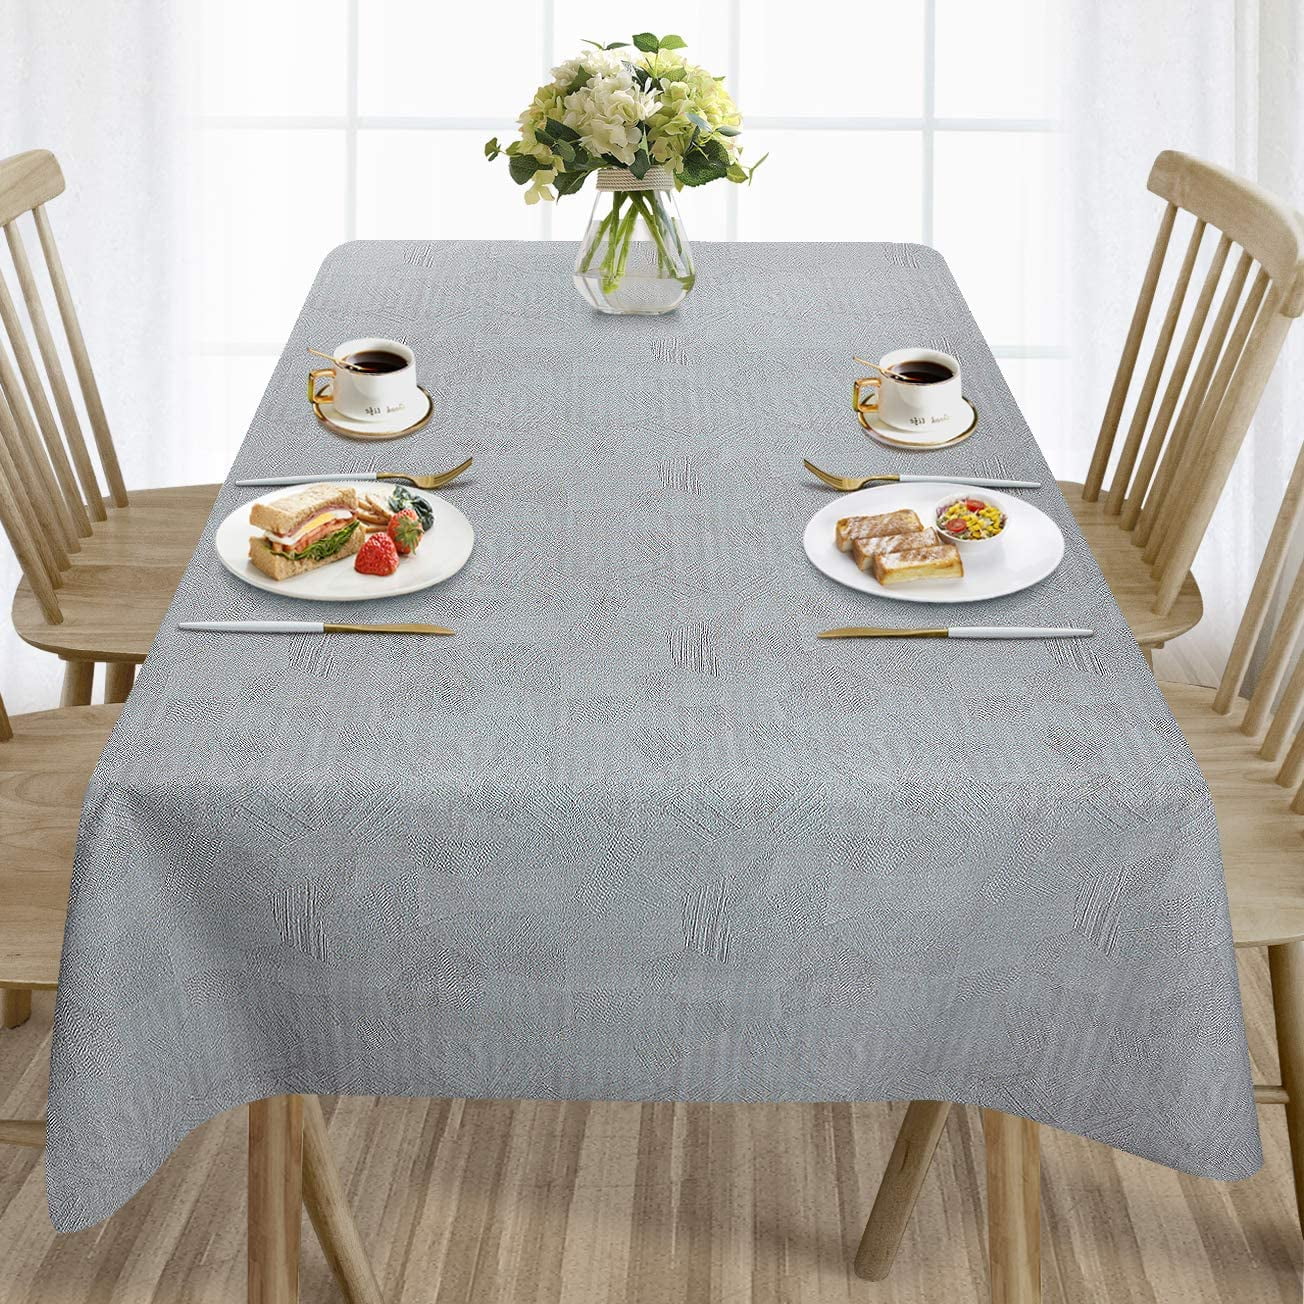 linen702 Vinyl Pvc Tablecloth Colourful Numbers 1.5 metres Textile Backed plastic table cloth 273 4 Seater Size Table 150x137cm Wipe Clean